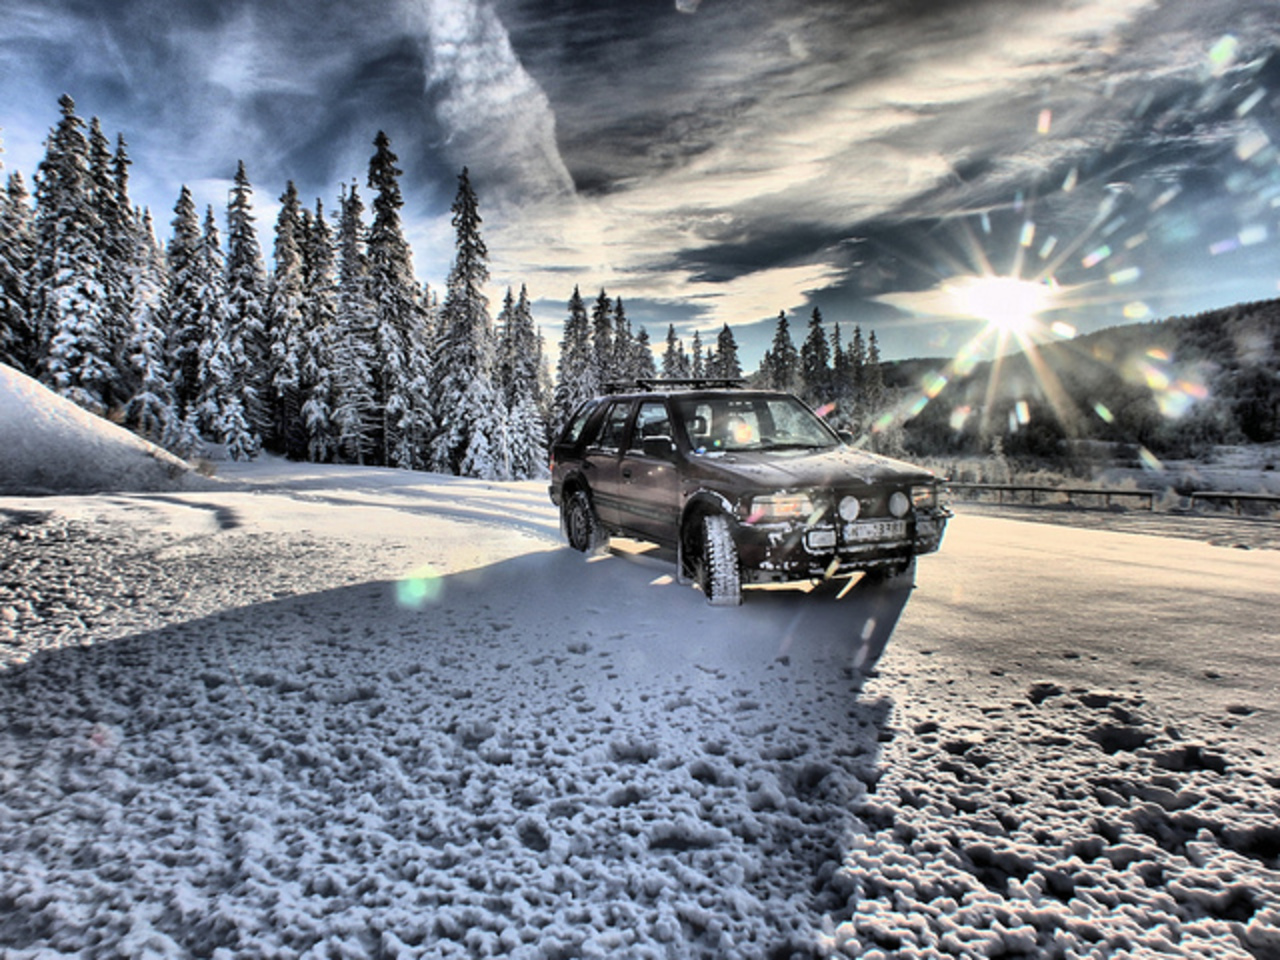 Opel Frontera in the arctic | Flickr - Photo Sharing!